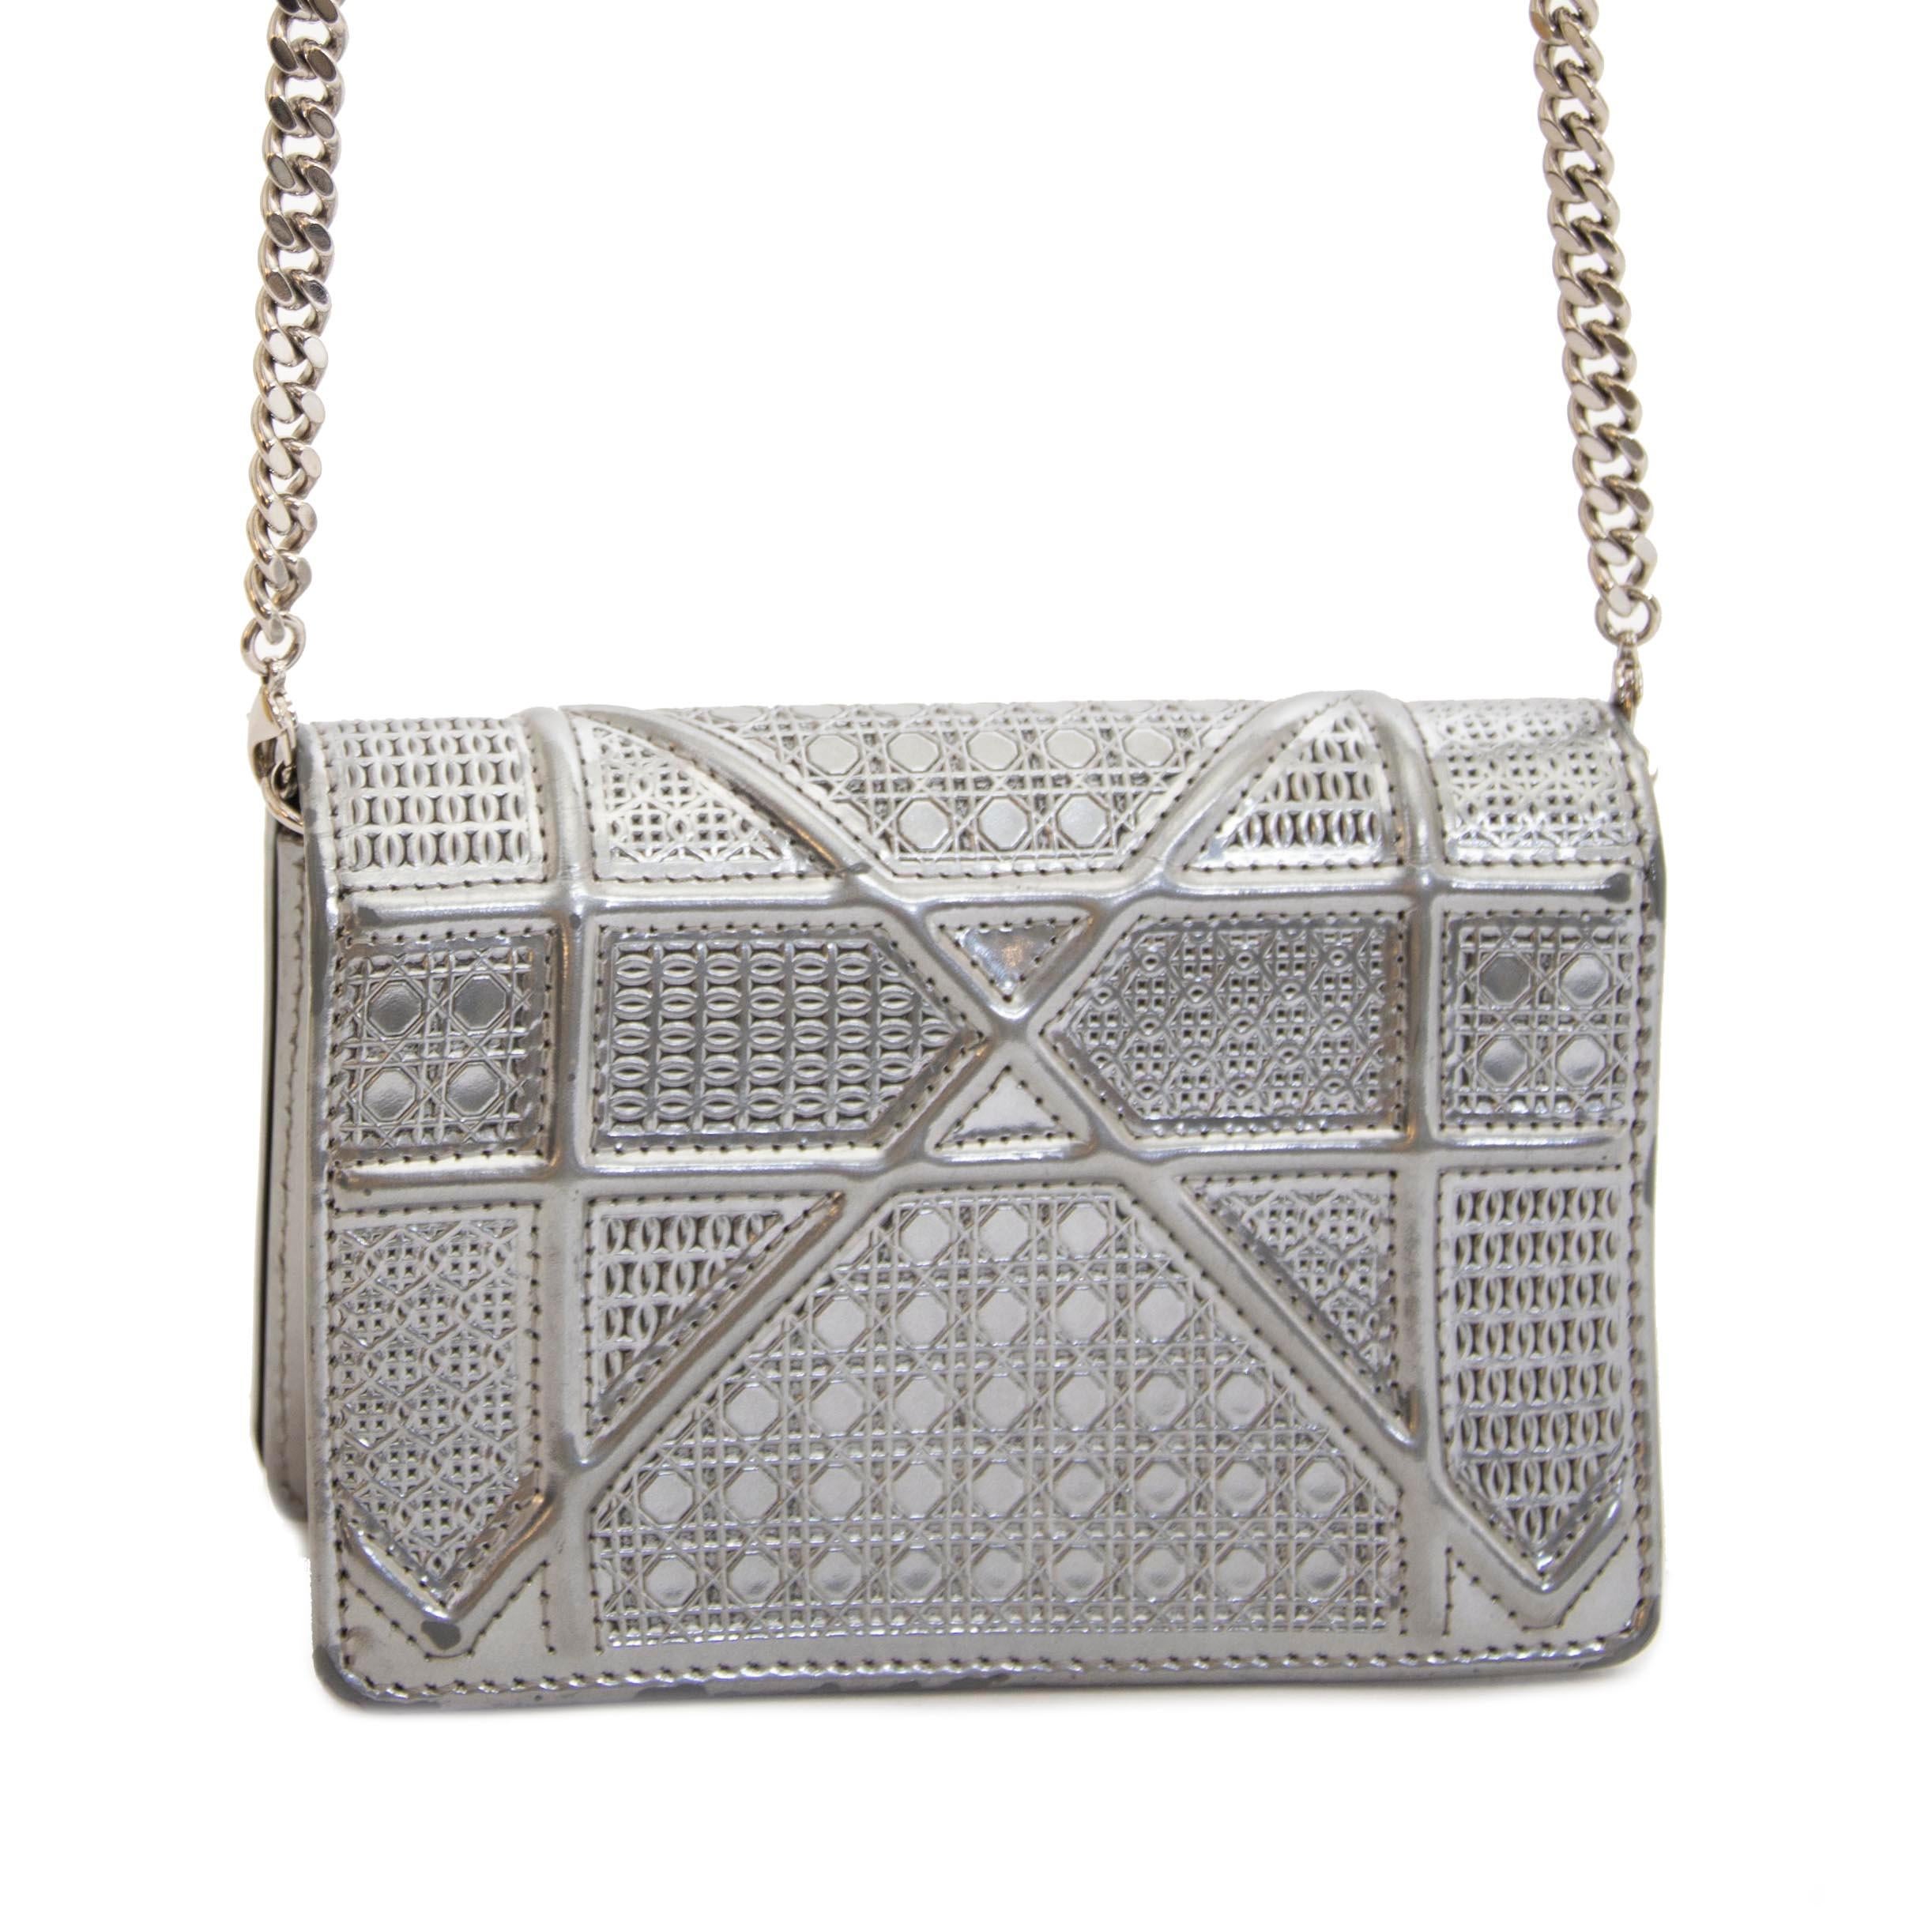 Very good condition

Dior Diorama Mini Silver Bag

Mini is the new maxi in the bag department.
Pair this mini silver Diorama bag up with other xs bags for the perfect look.
The bag has one compartment and has a side pocket for cards.
It comes with a